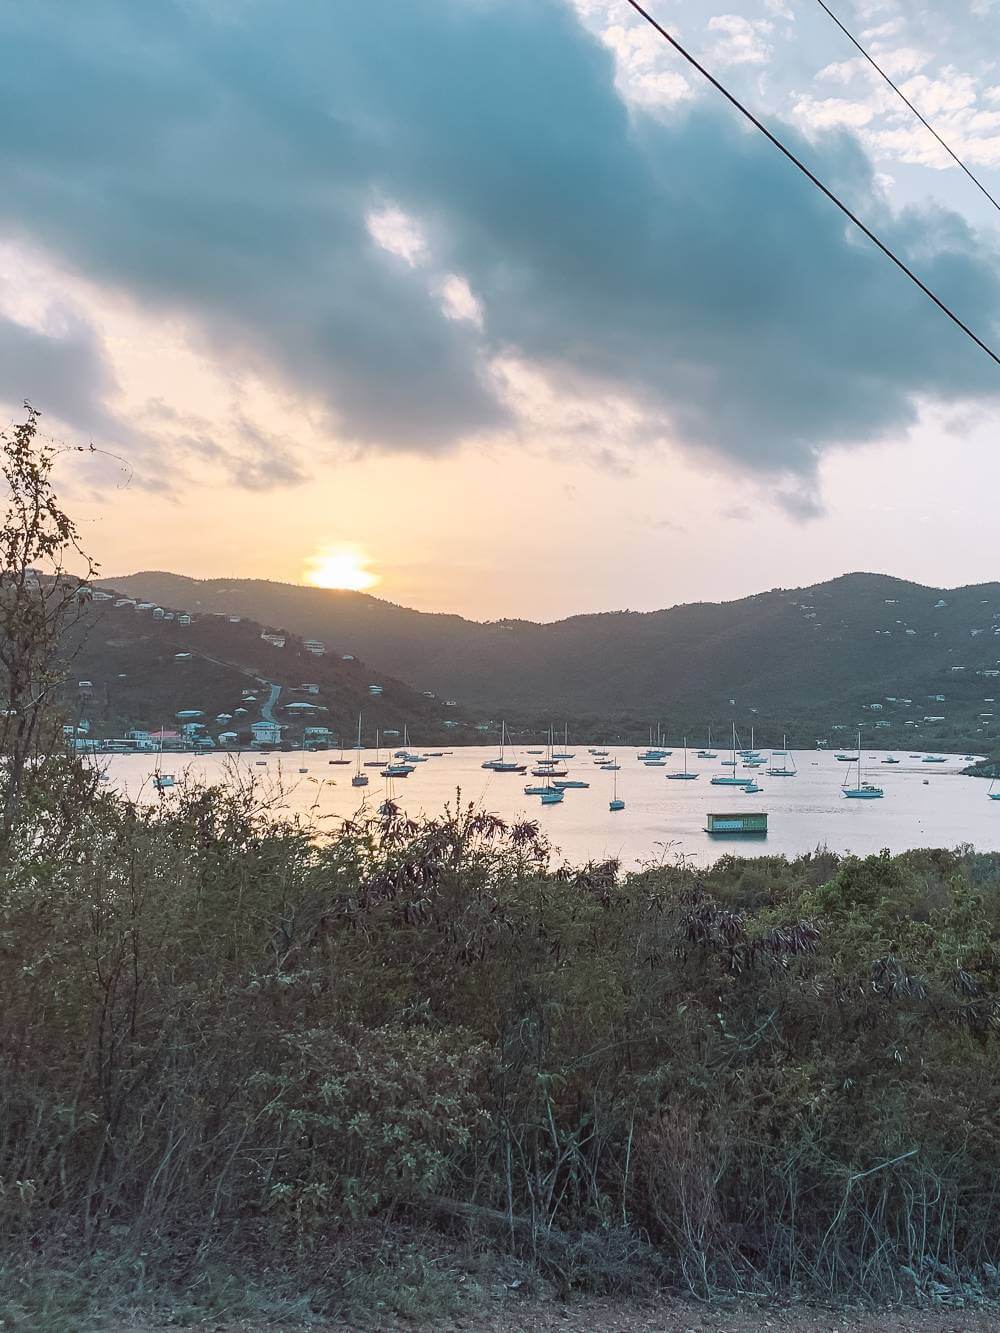 View of Lime Out in Coral Harbor from the hills of St John USVI